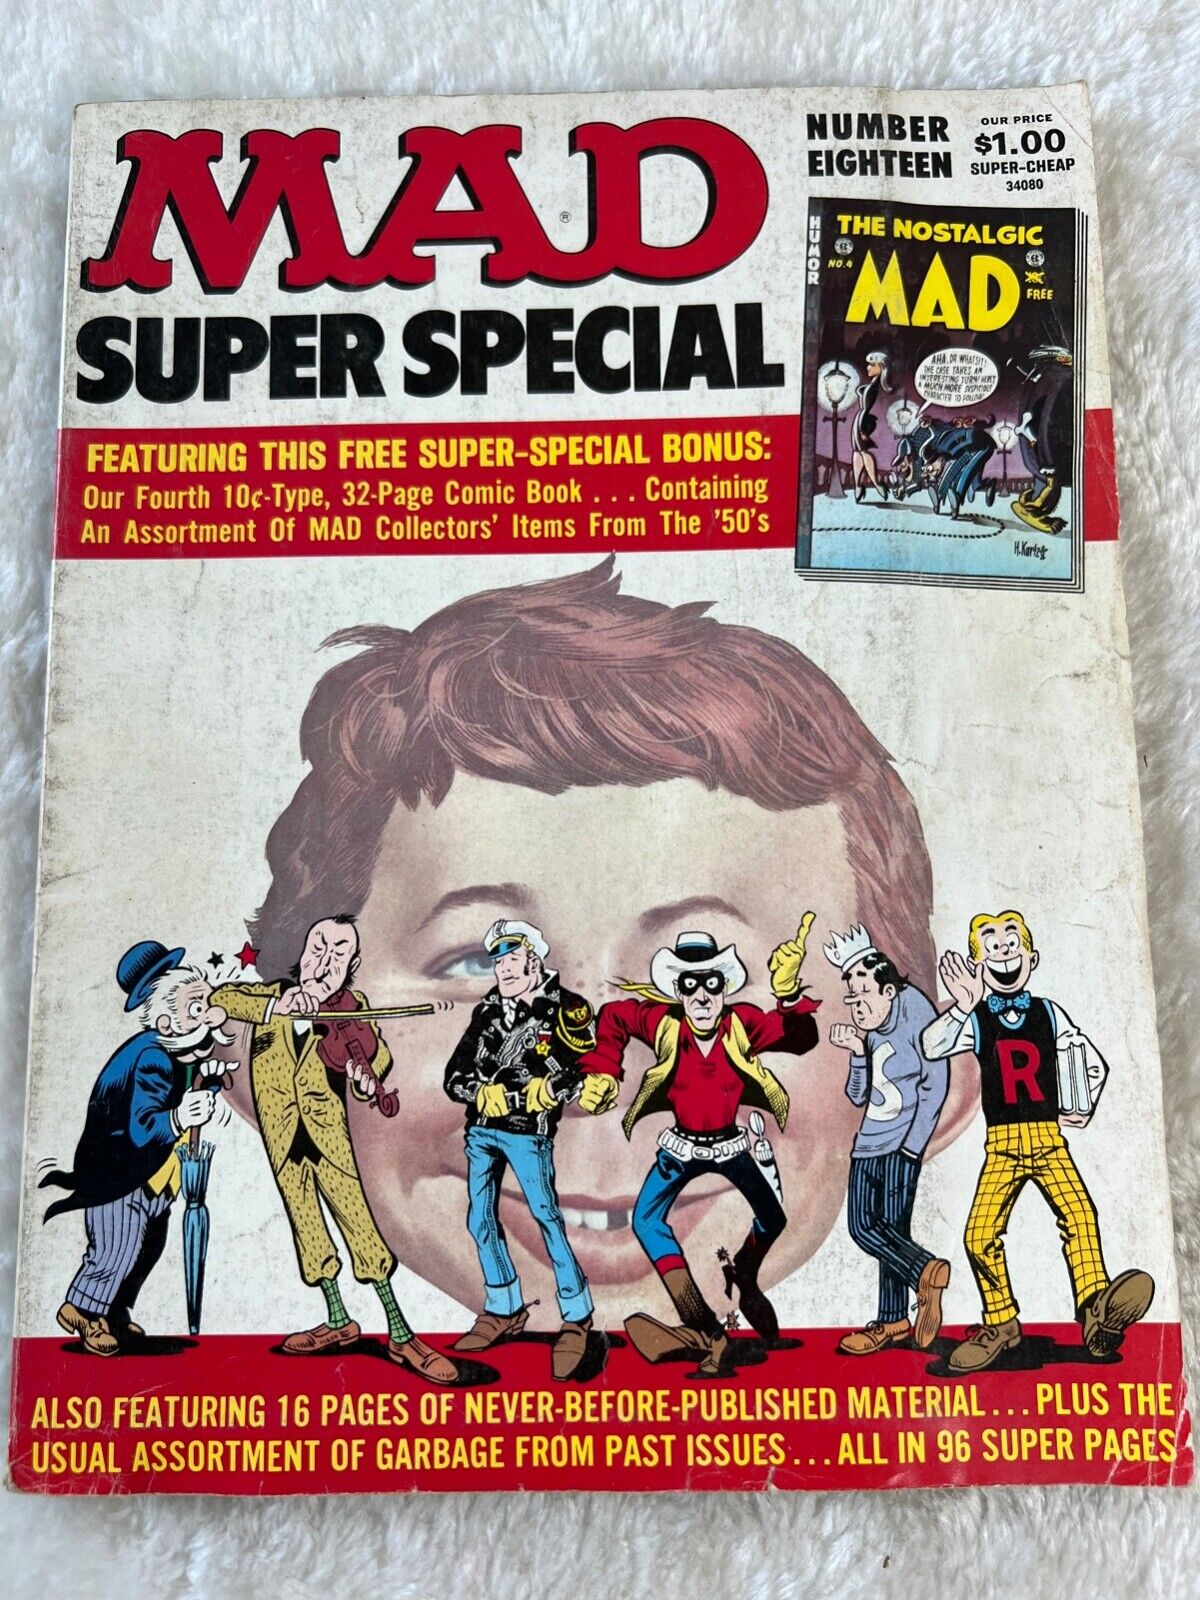 Mad Magazine Super Special Edition 1975 Number 18